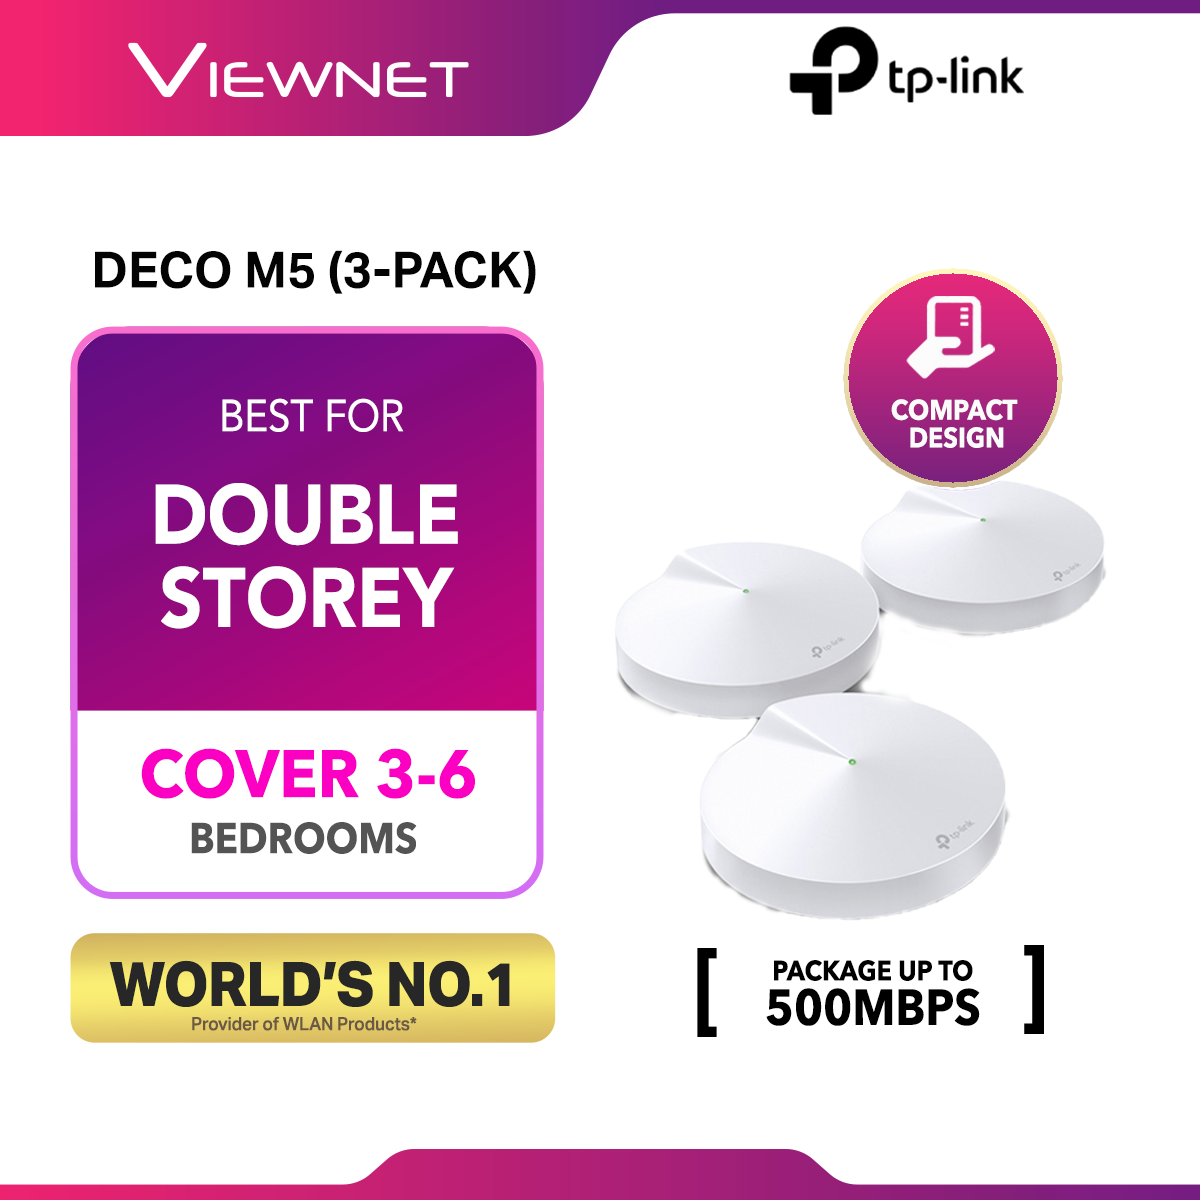 TP-Link Deco M5 (3 Pack) - AC1300 MU-MIMO Security Protection Whole Home Mesh WiFi Gigabit Router System 2.4GHz + 5GHz Dual Band